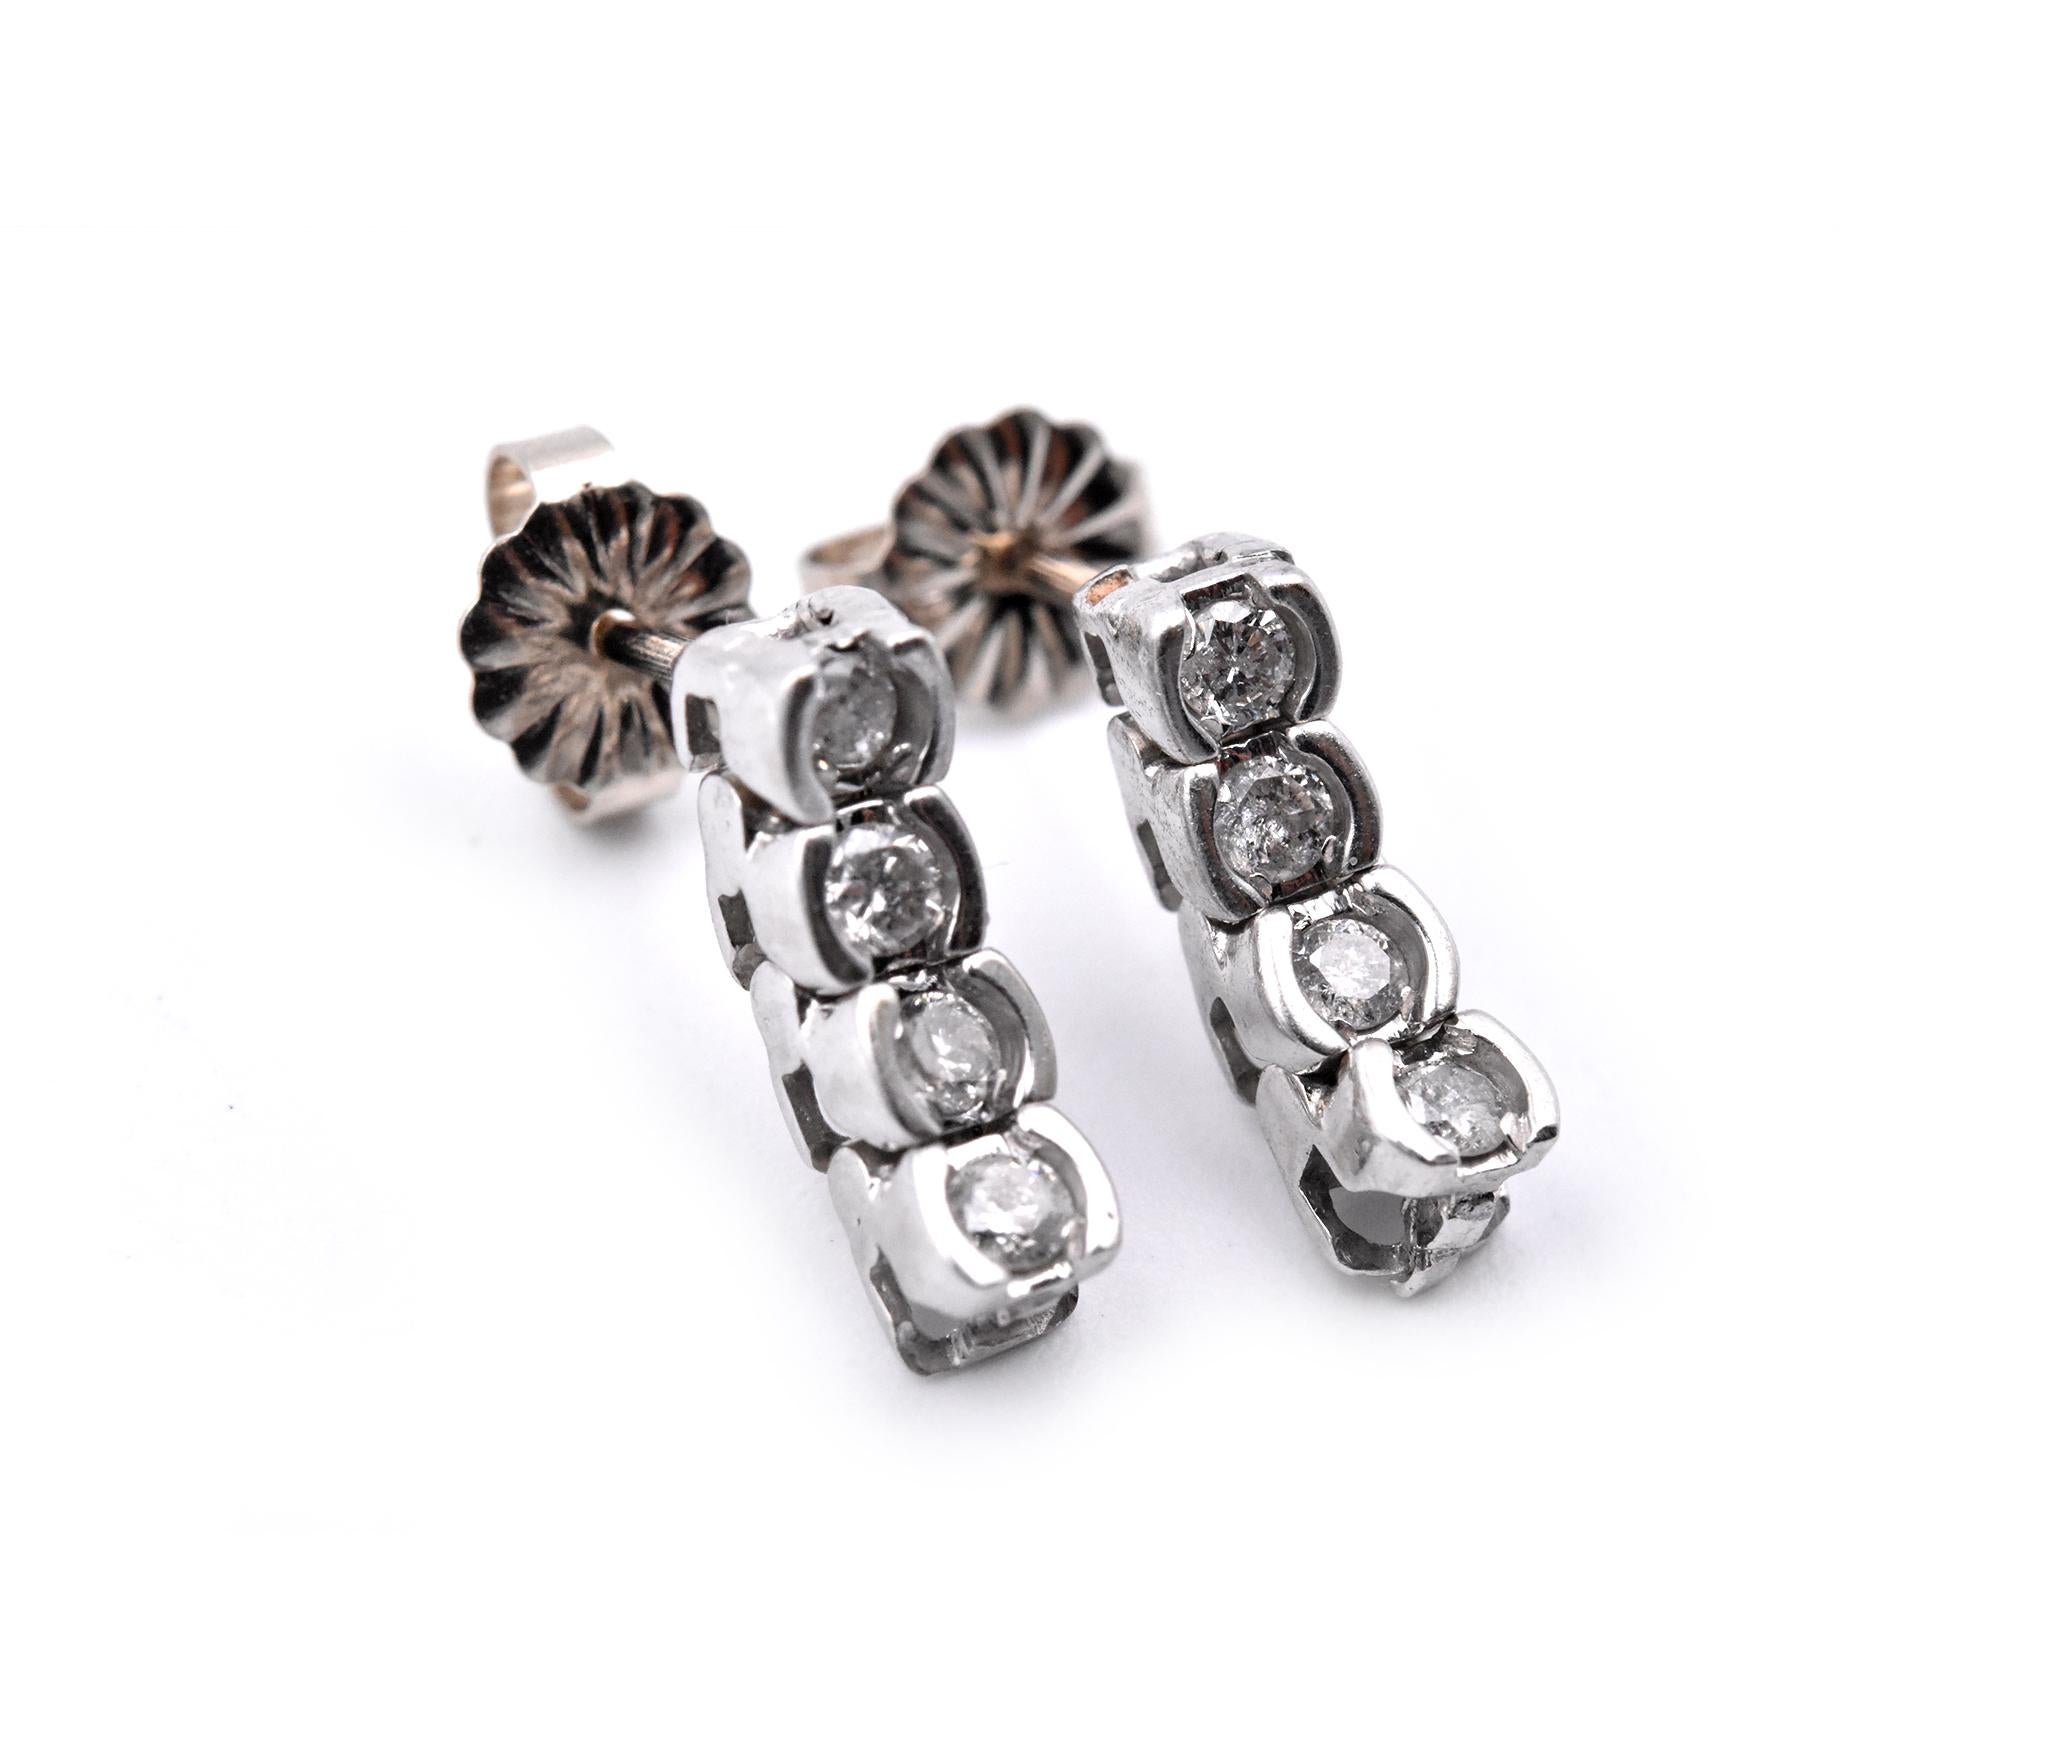 Material: 14k white gold
Diamonds: 8 round brilliant cuts = 0.25cttw
Color: H
Clarity: I1
Dimensions: earrings measure 13mm x 3.67mm
Fastenings: post with friction backs
Weight: 2.1 grams
